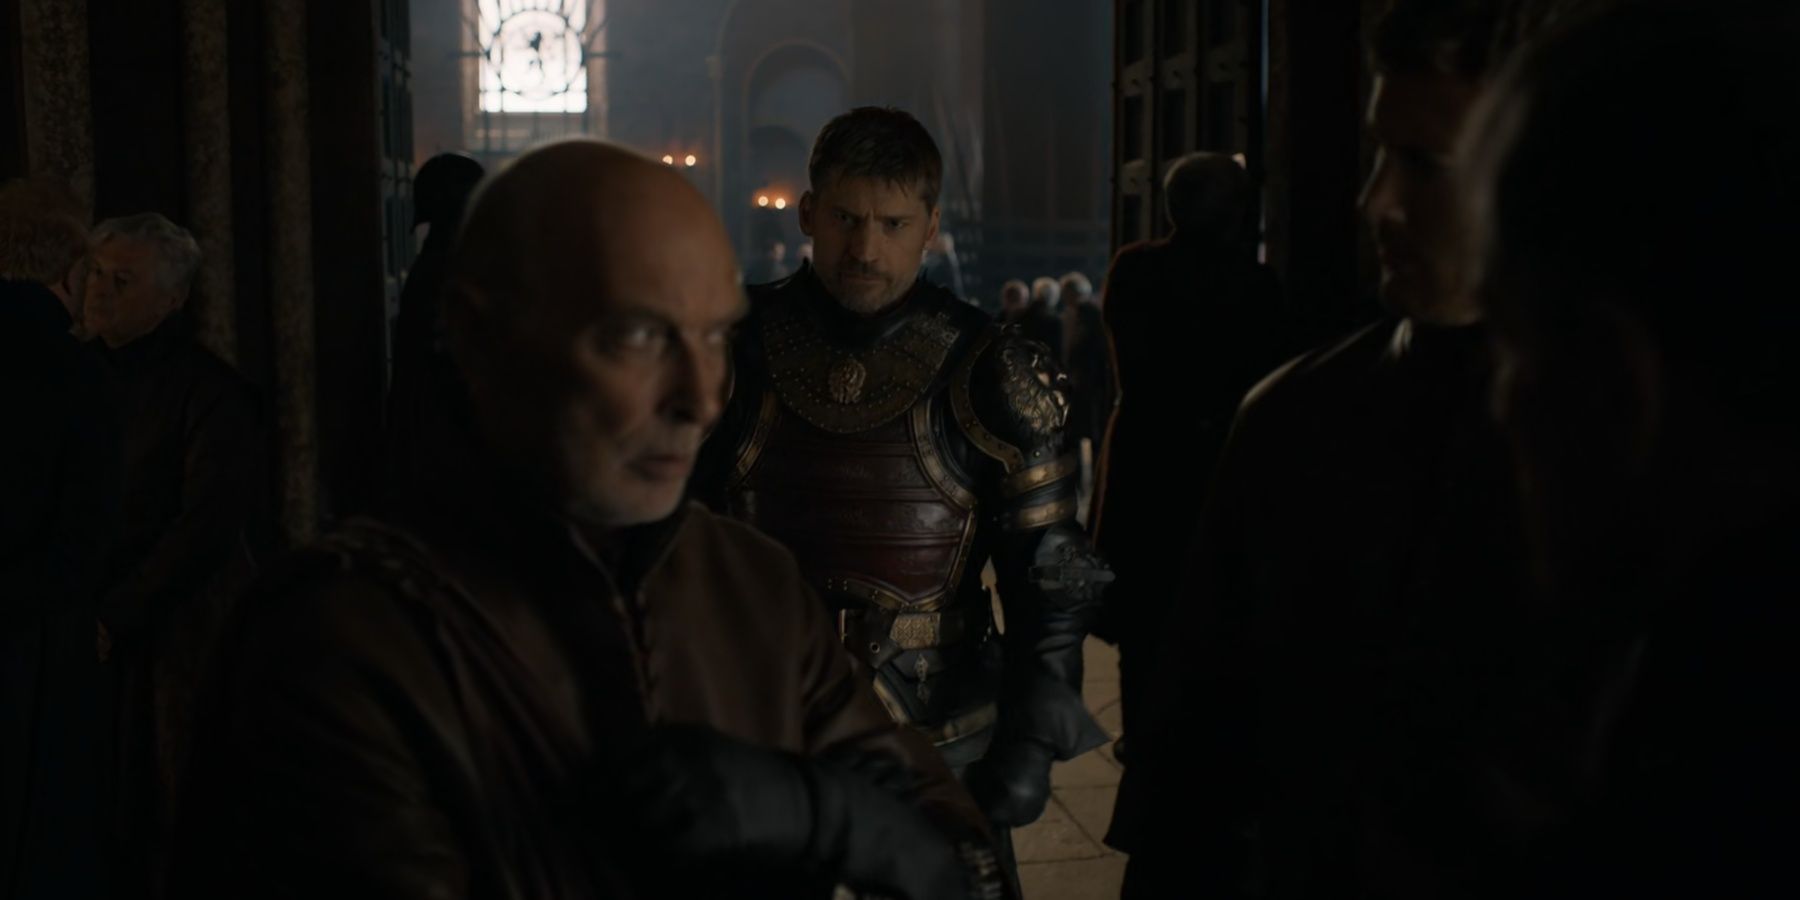 Lord Randyll Tarly Jaime Lannister and Dickon Tarly in Game of Thrones.